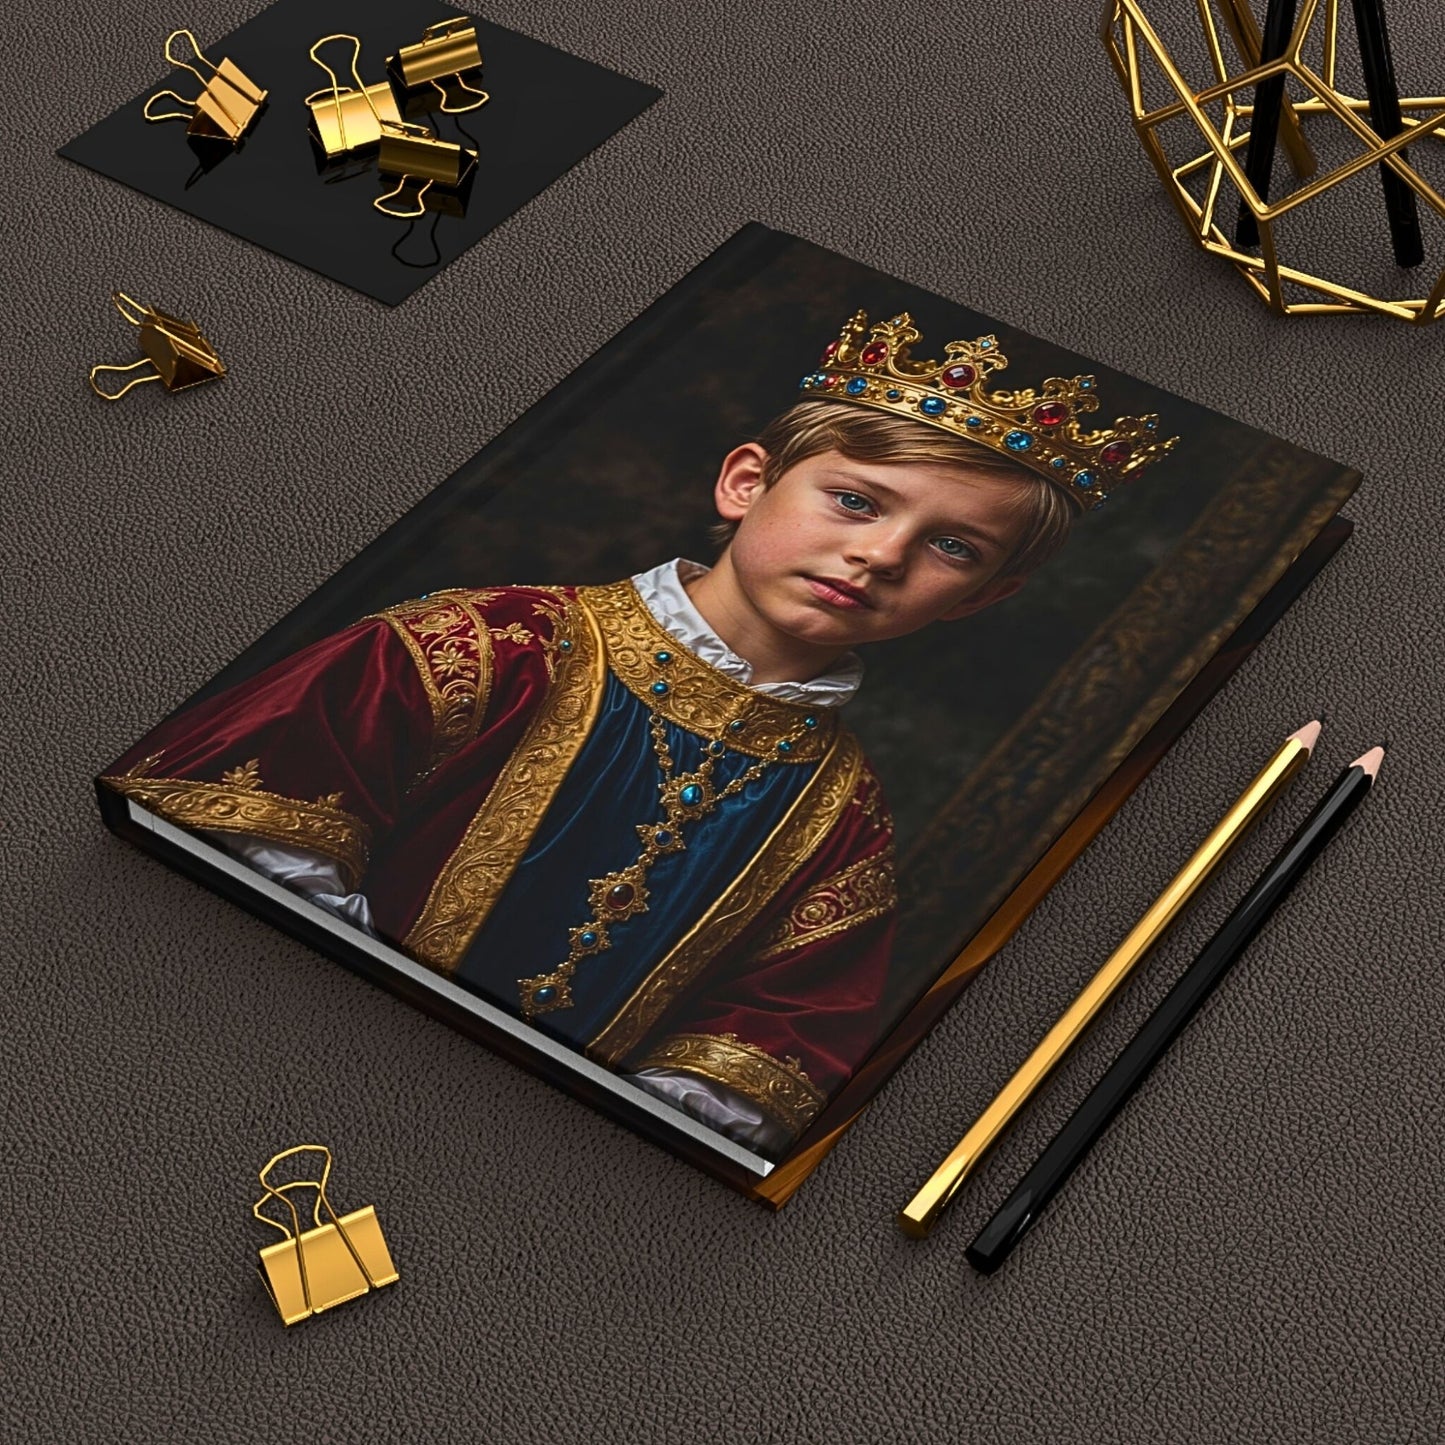 Introducing our Custom Kids Royal Journal from Photo, an exquisite tribute that turns your child’s photograph into a sophisticated piece of art. This journal combines the charm of personalized craftsmanship with the allure of historical grandeur, offering a unique way to immortalize precious memories.